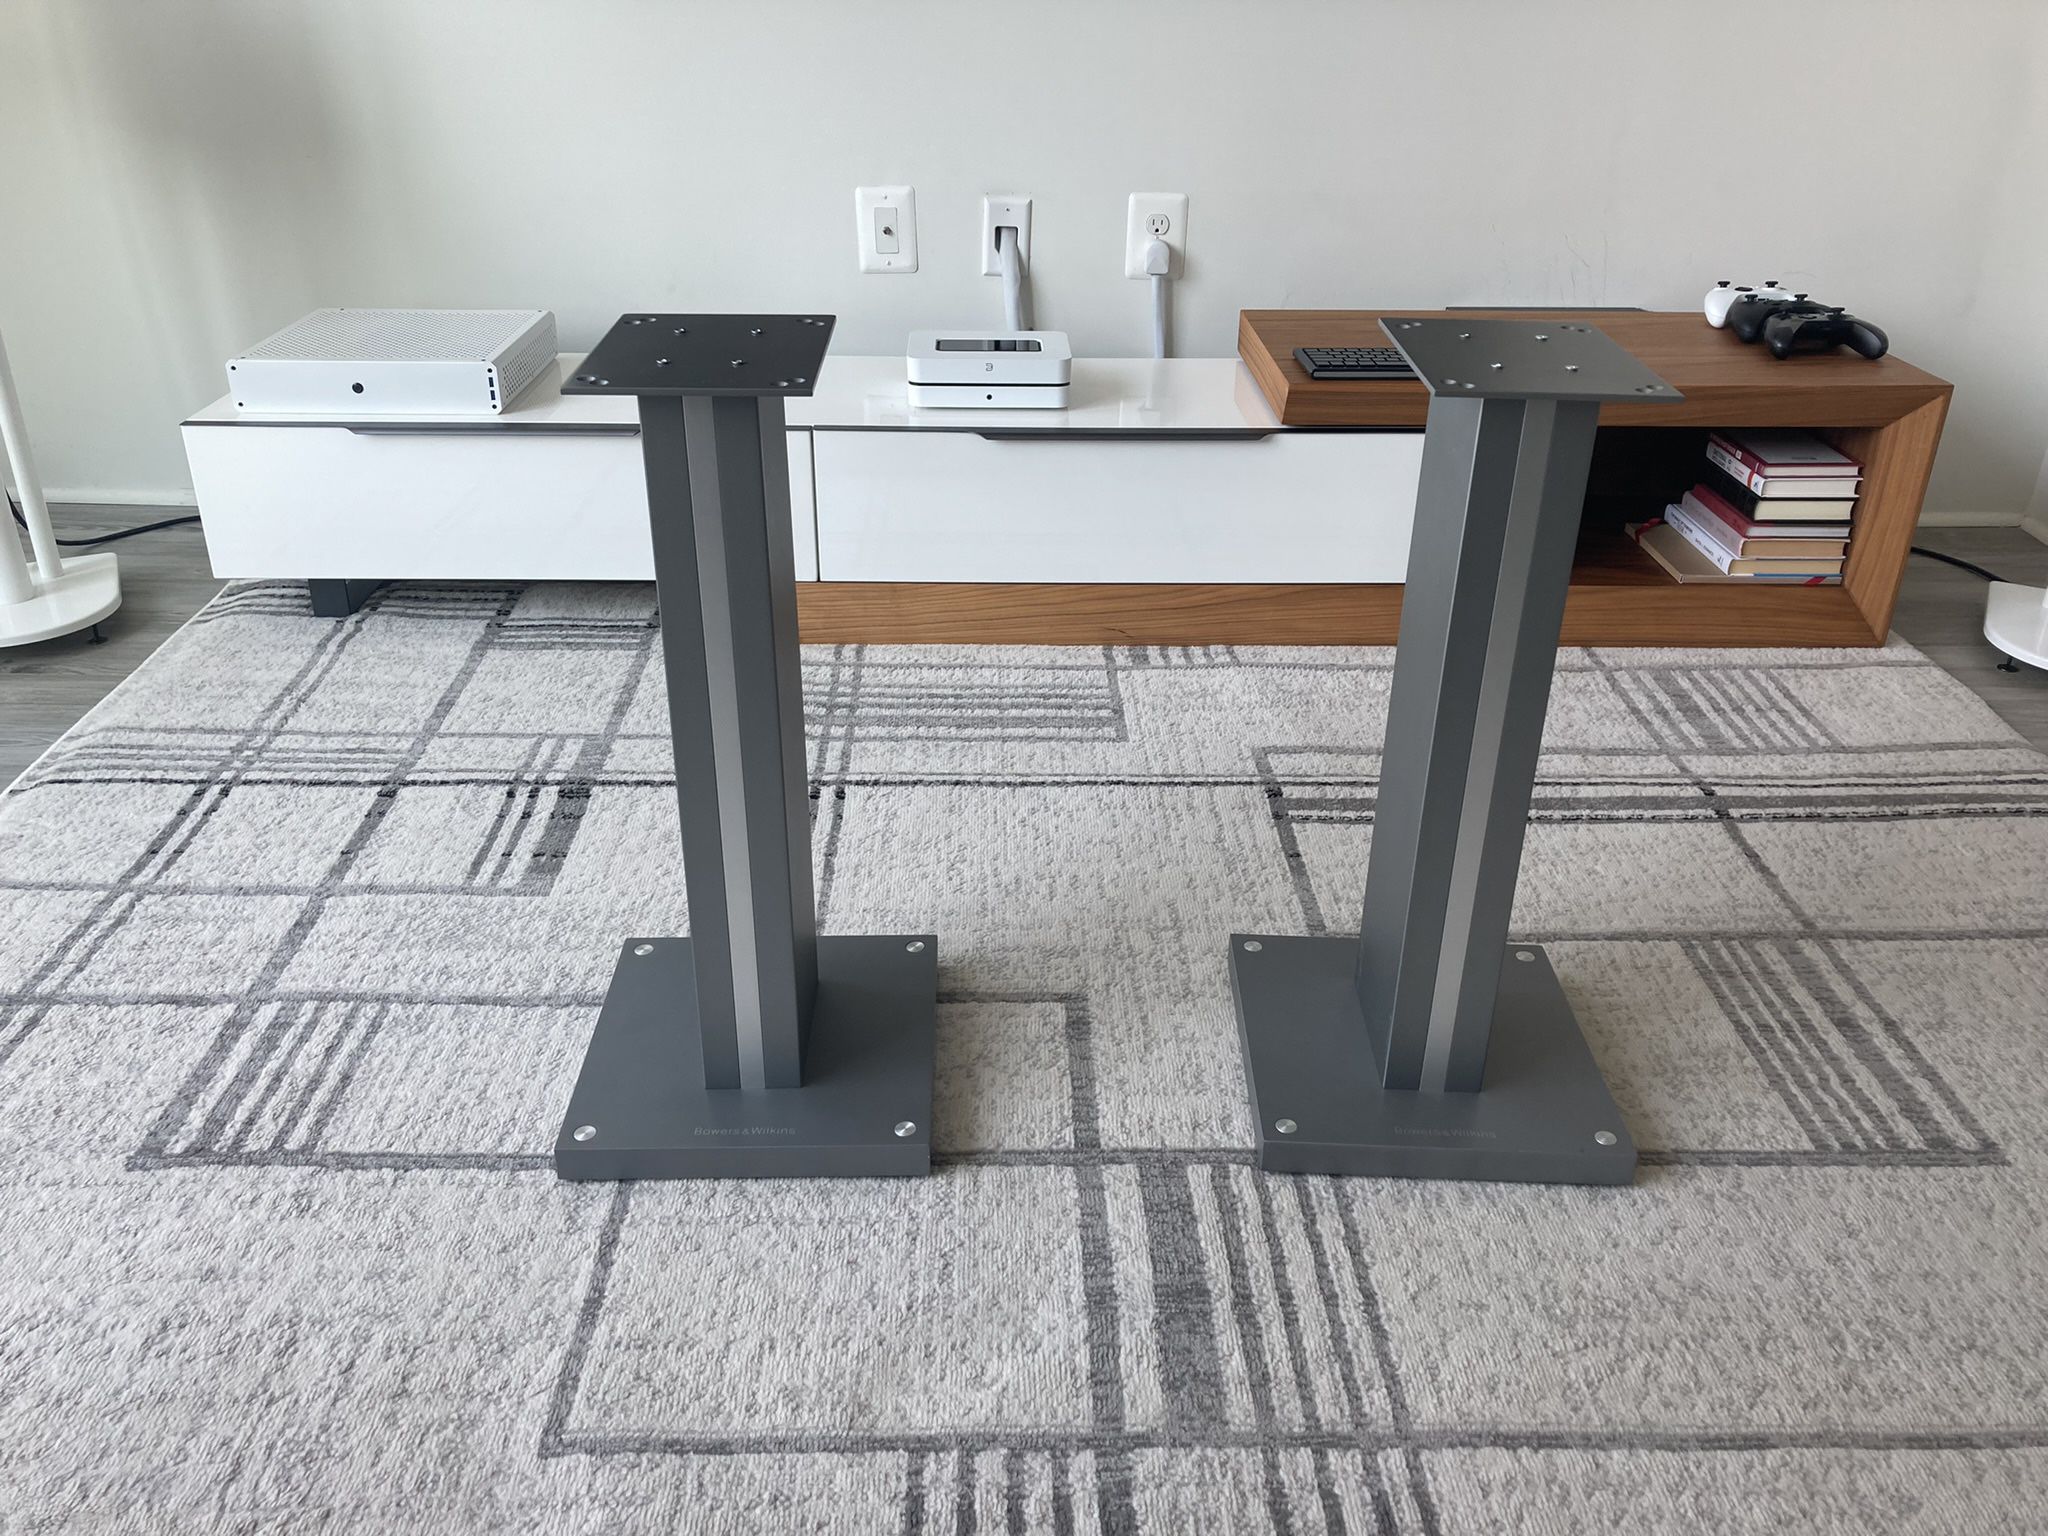 Bower and wilkins 705 S2 Stand